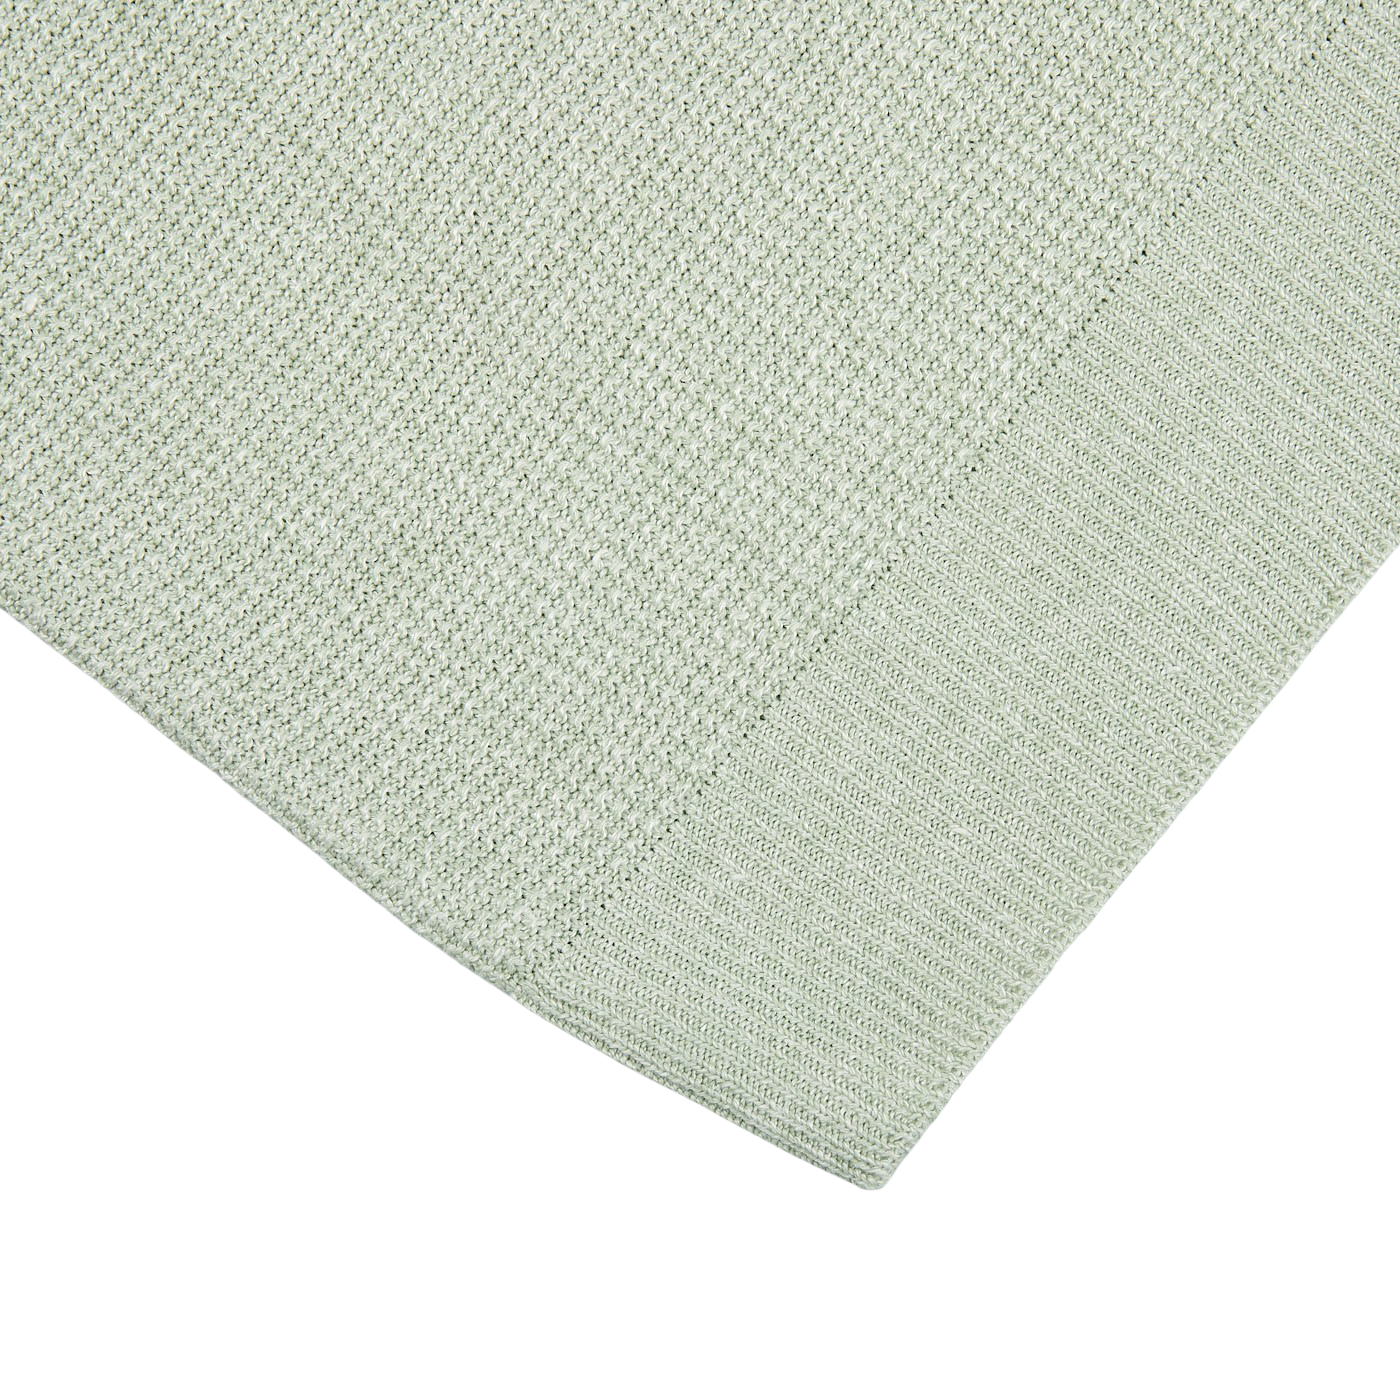 A light green Gran Sasso woven blanket on a white surface.